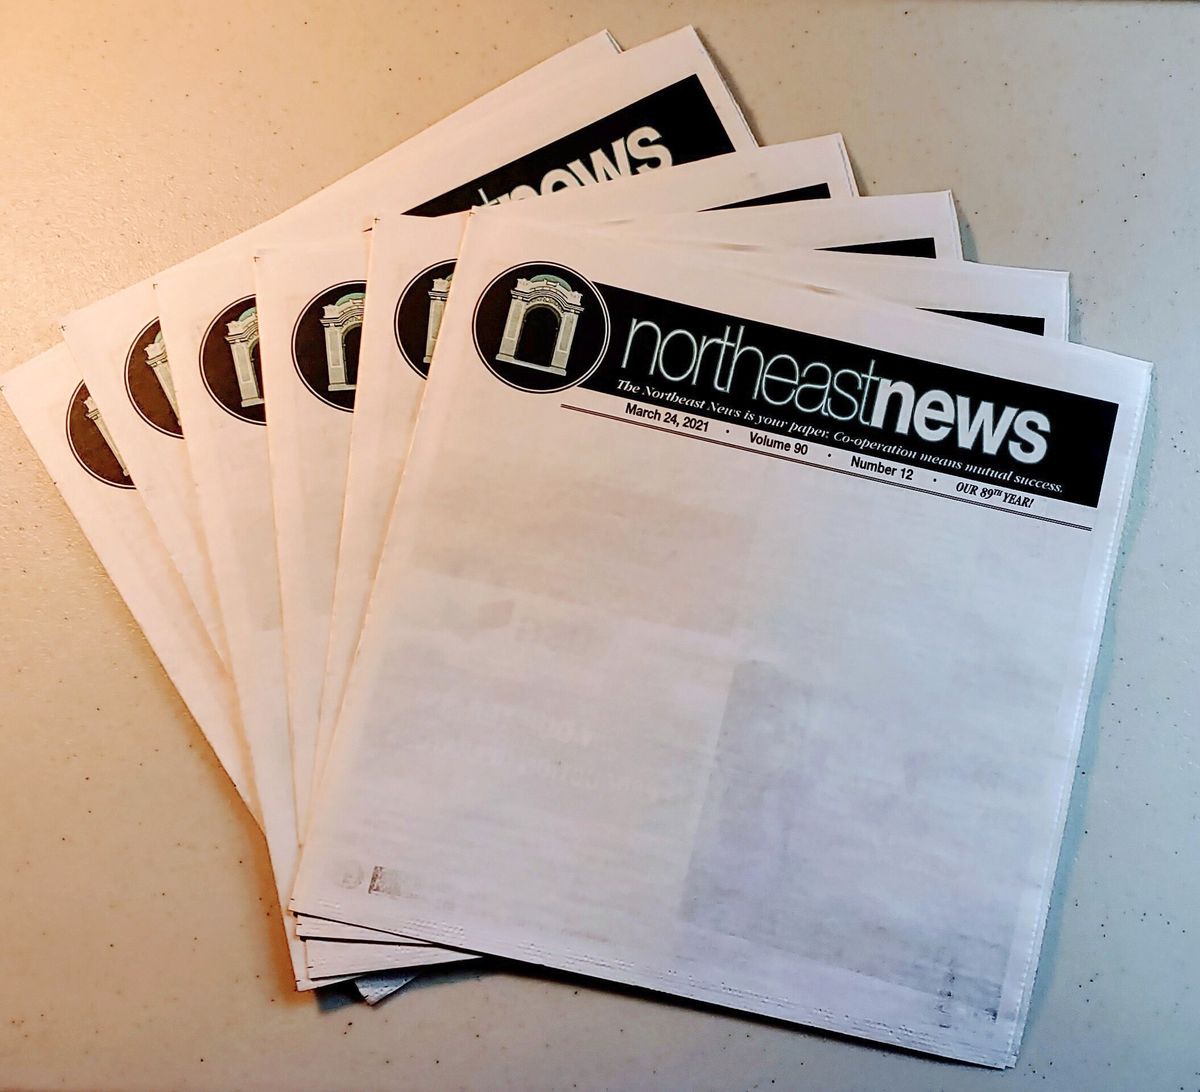 Copies of the March 24, 2021 edition of The Northeast News featuring a blank front page appear in Kansas City, Mo. on March 26, 2021. The paper chose to leave the front page of their March 24 issue blank to show community members what they